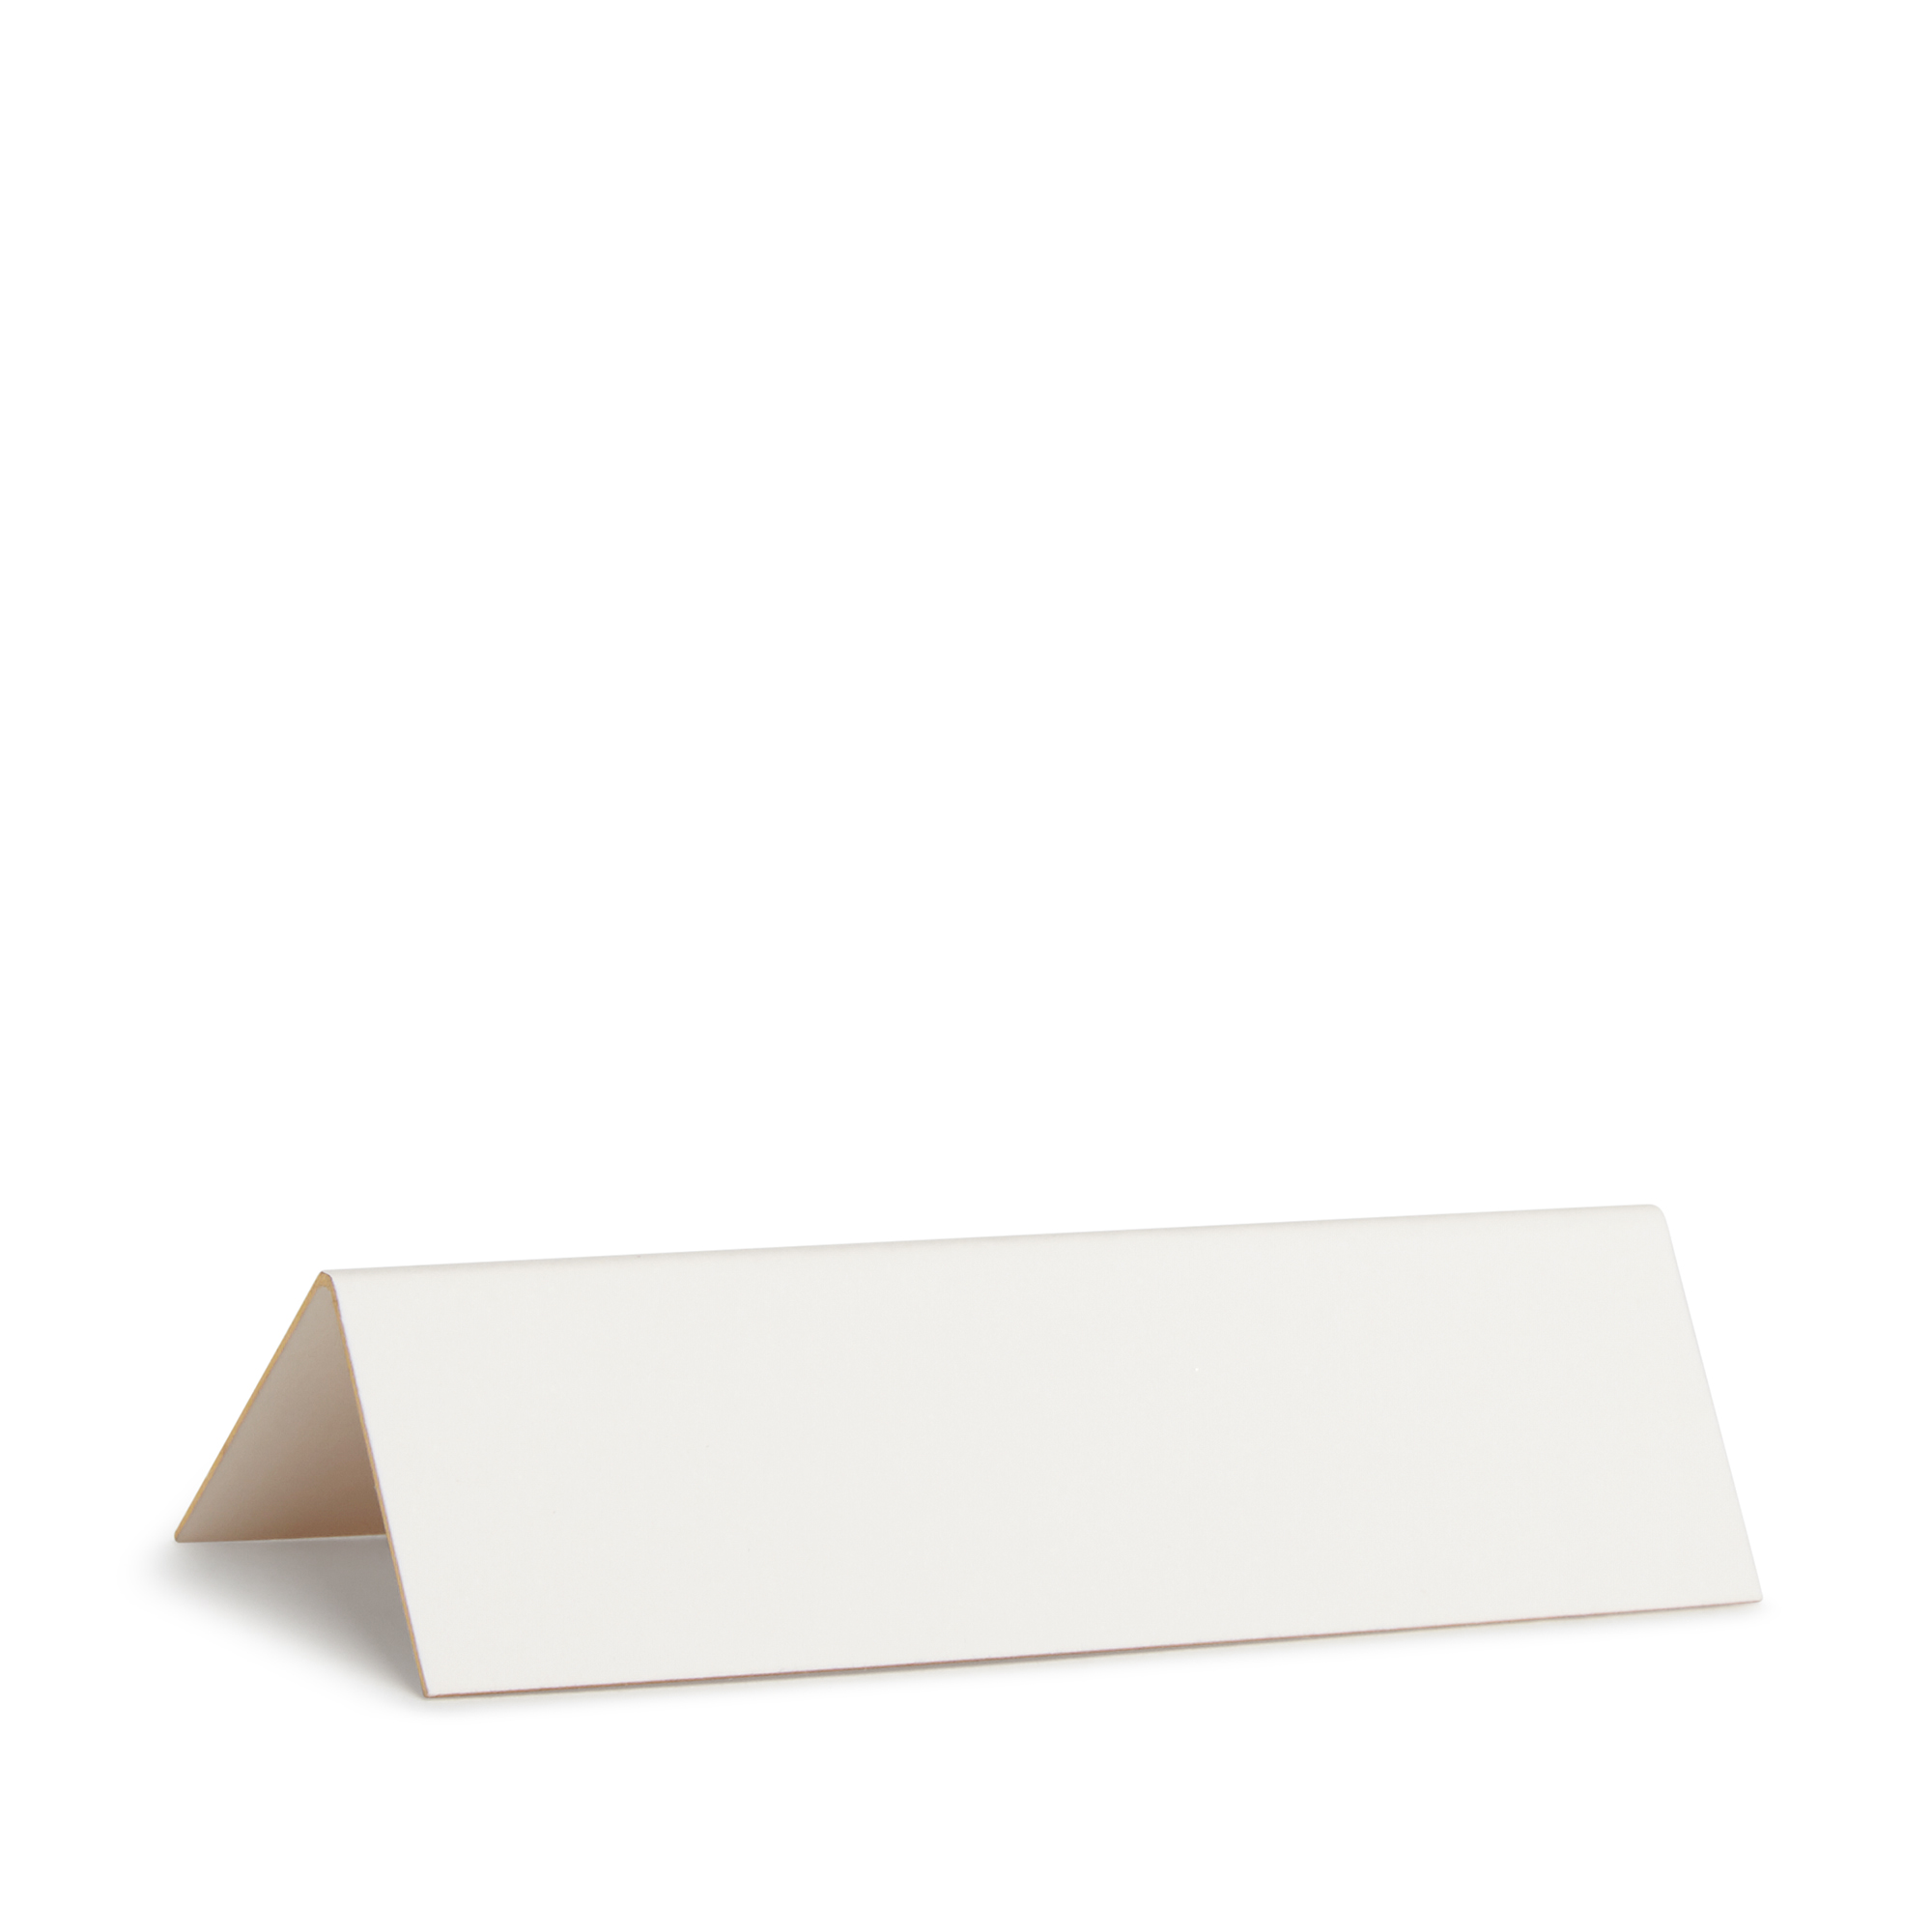 Smythson Small Tented Place Cards In Silver Edging